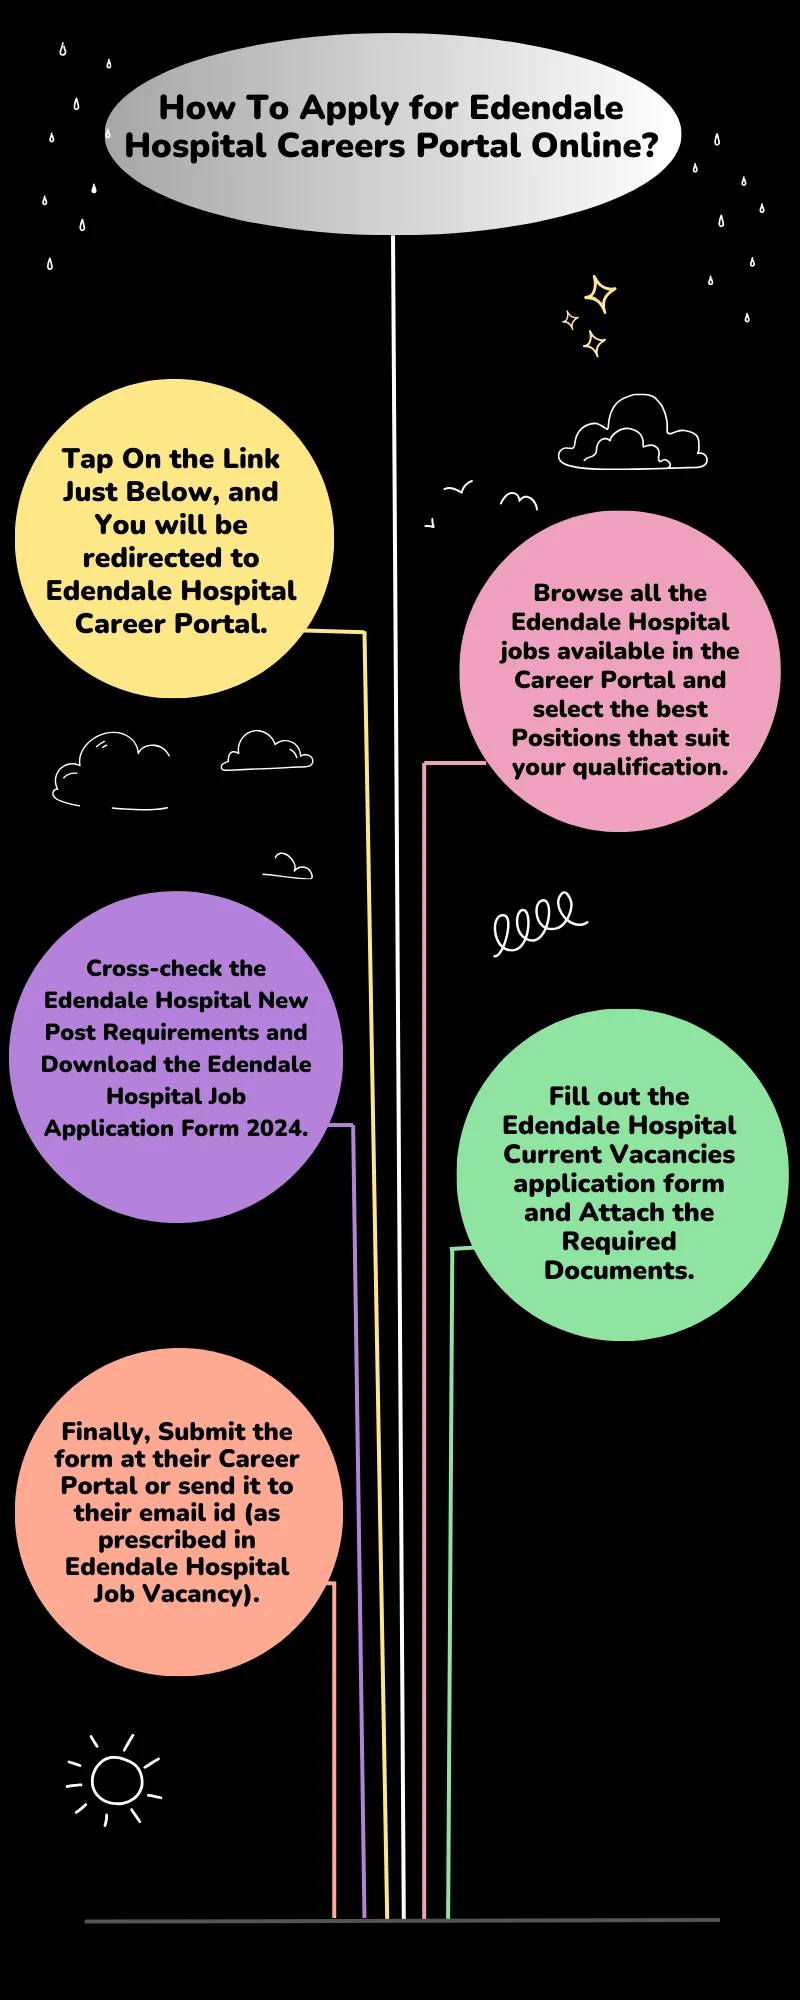 How To Apply for Edendale Hospital Careers Portal Online?